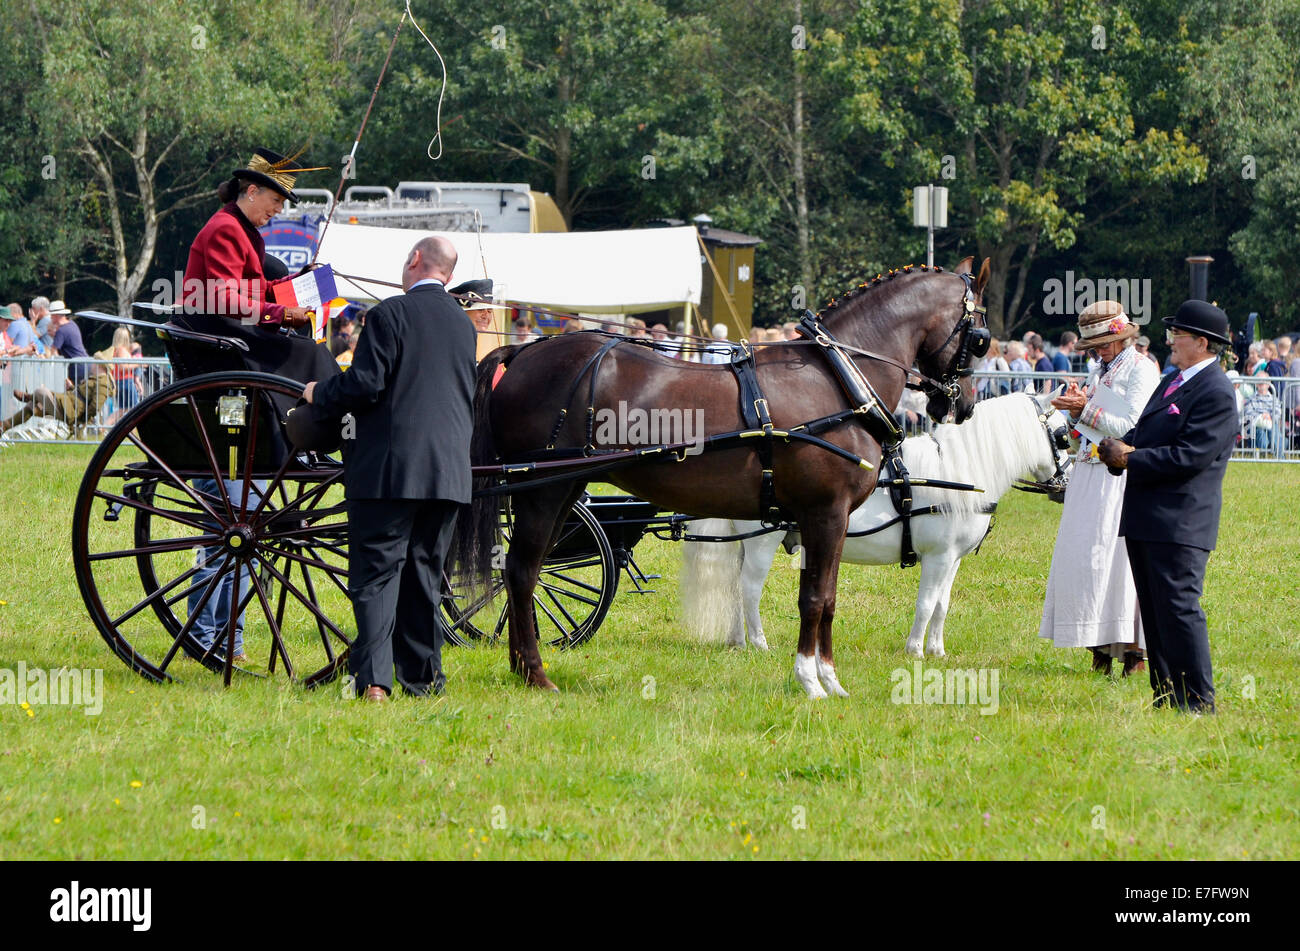 Judging of immaculate and well turned out carriages and horses at Romsey Show 2014. Stock Photo